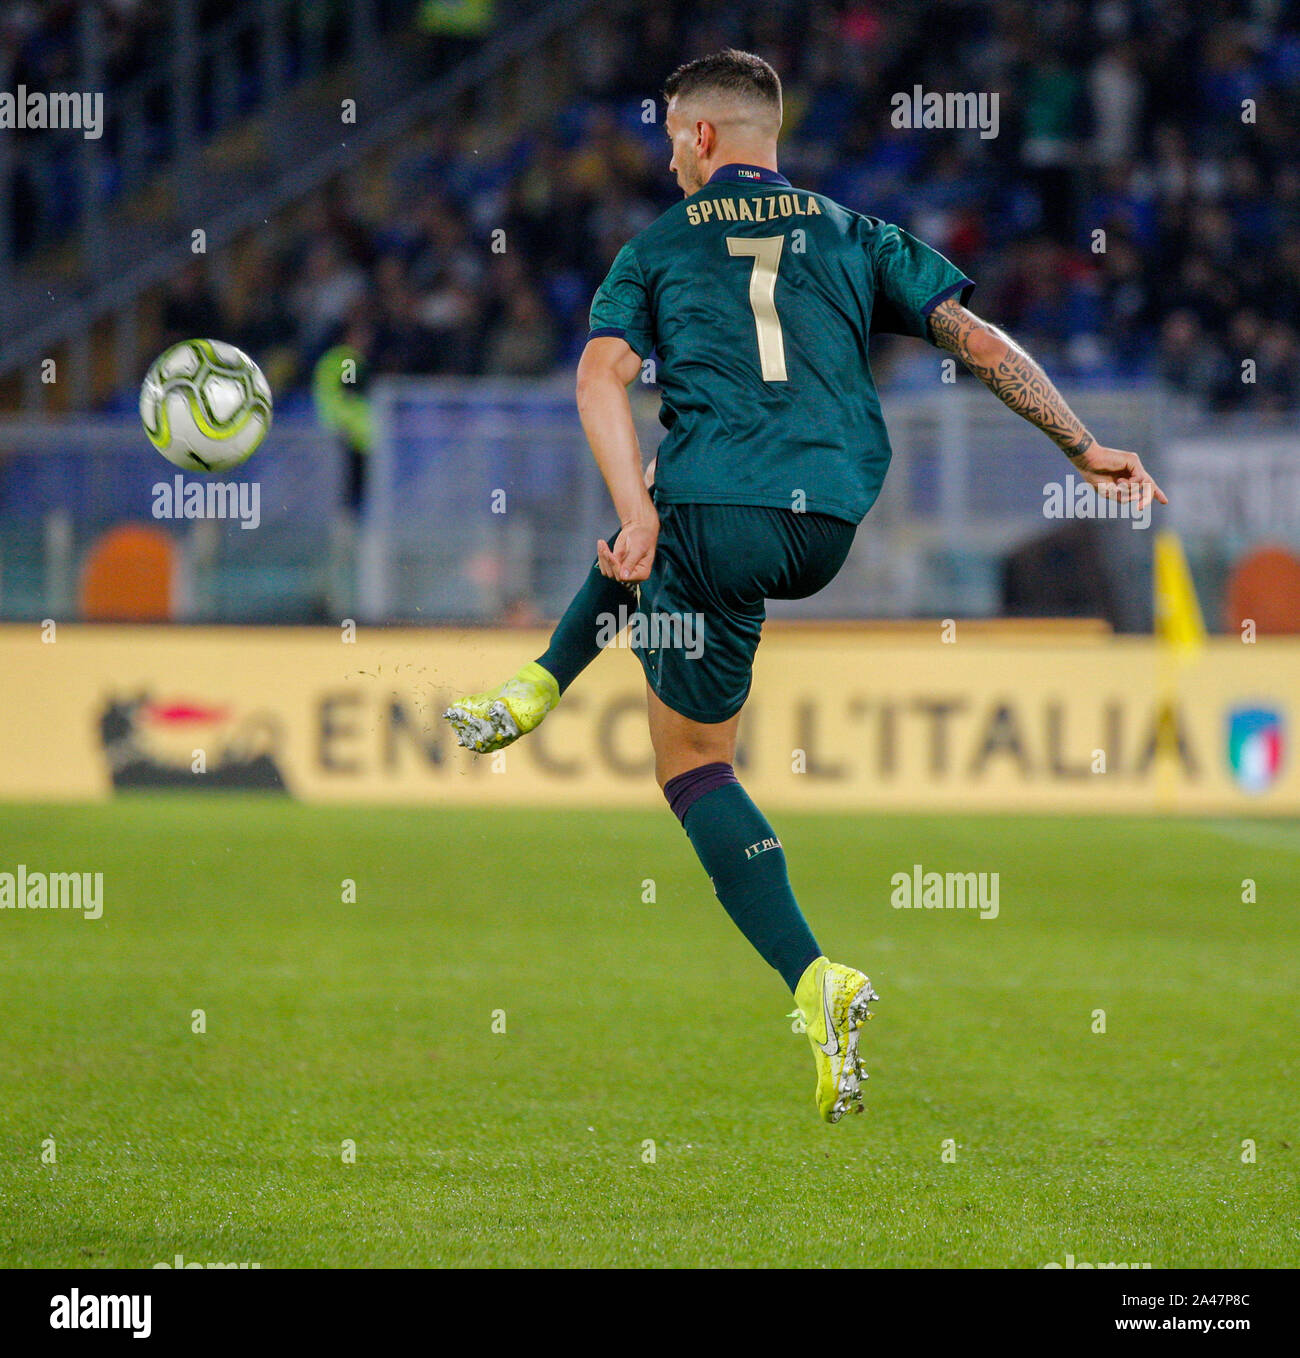 Rome, Italy. . 12th Oct, 2019. 22/10/2019 Rome, Football match between ITALY vs GREECE valid for the European football championships.In picture Leonardo spinazzola. Credit: Fabio Sasso/ZUMA Wire/Alamy Live News Stock Photo